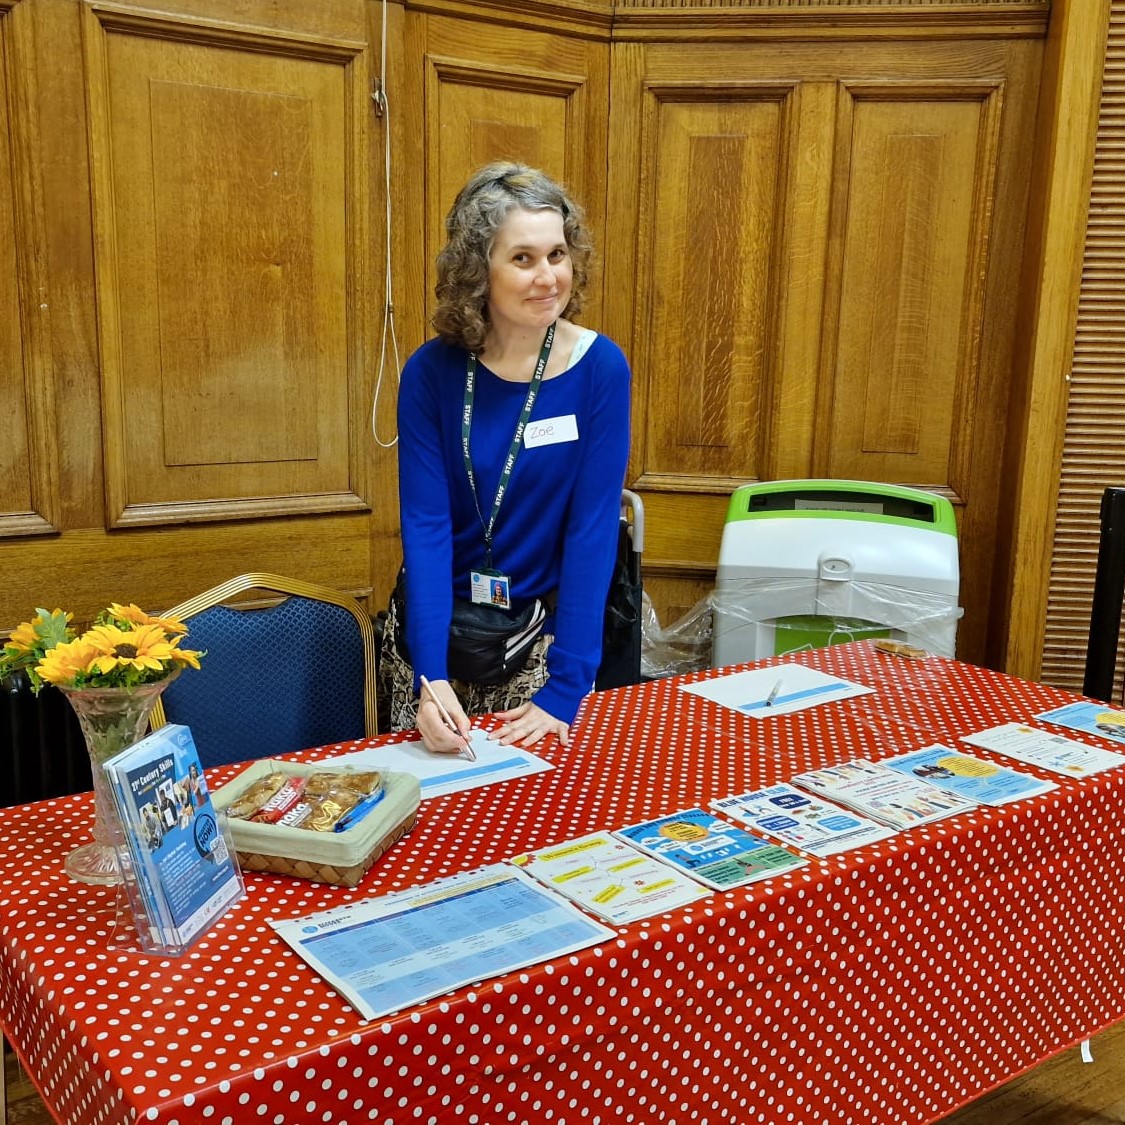 We had fun watching the entertainment at Islington's Celebration Event at the Town Hall! Thanks to everyone who chatted to us on the stand - looking forward to seeing you again. Contact us about our work and any collaborations.

#CommunityOrganising #Islington #Community